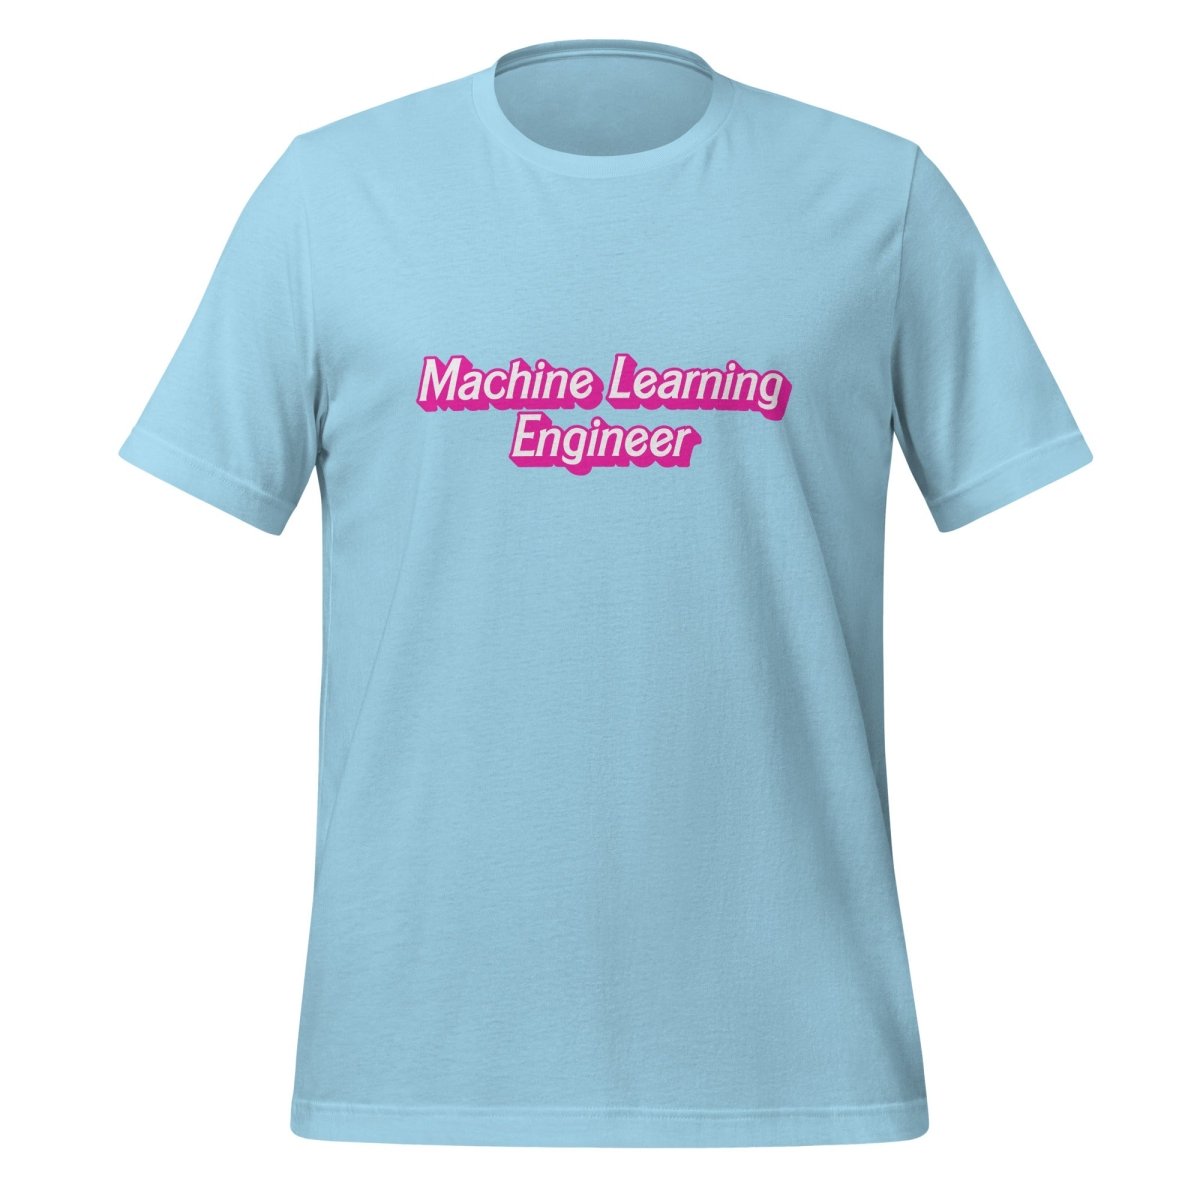 Machine Learning Engineer Barbie - Style T - Shirt (unisex) - Ocean Blue - AI Store